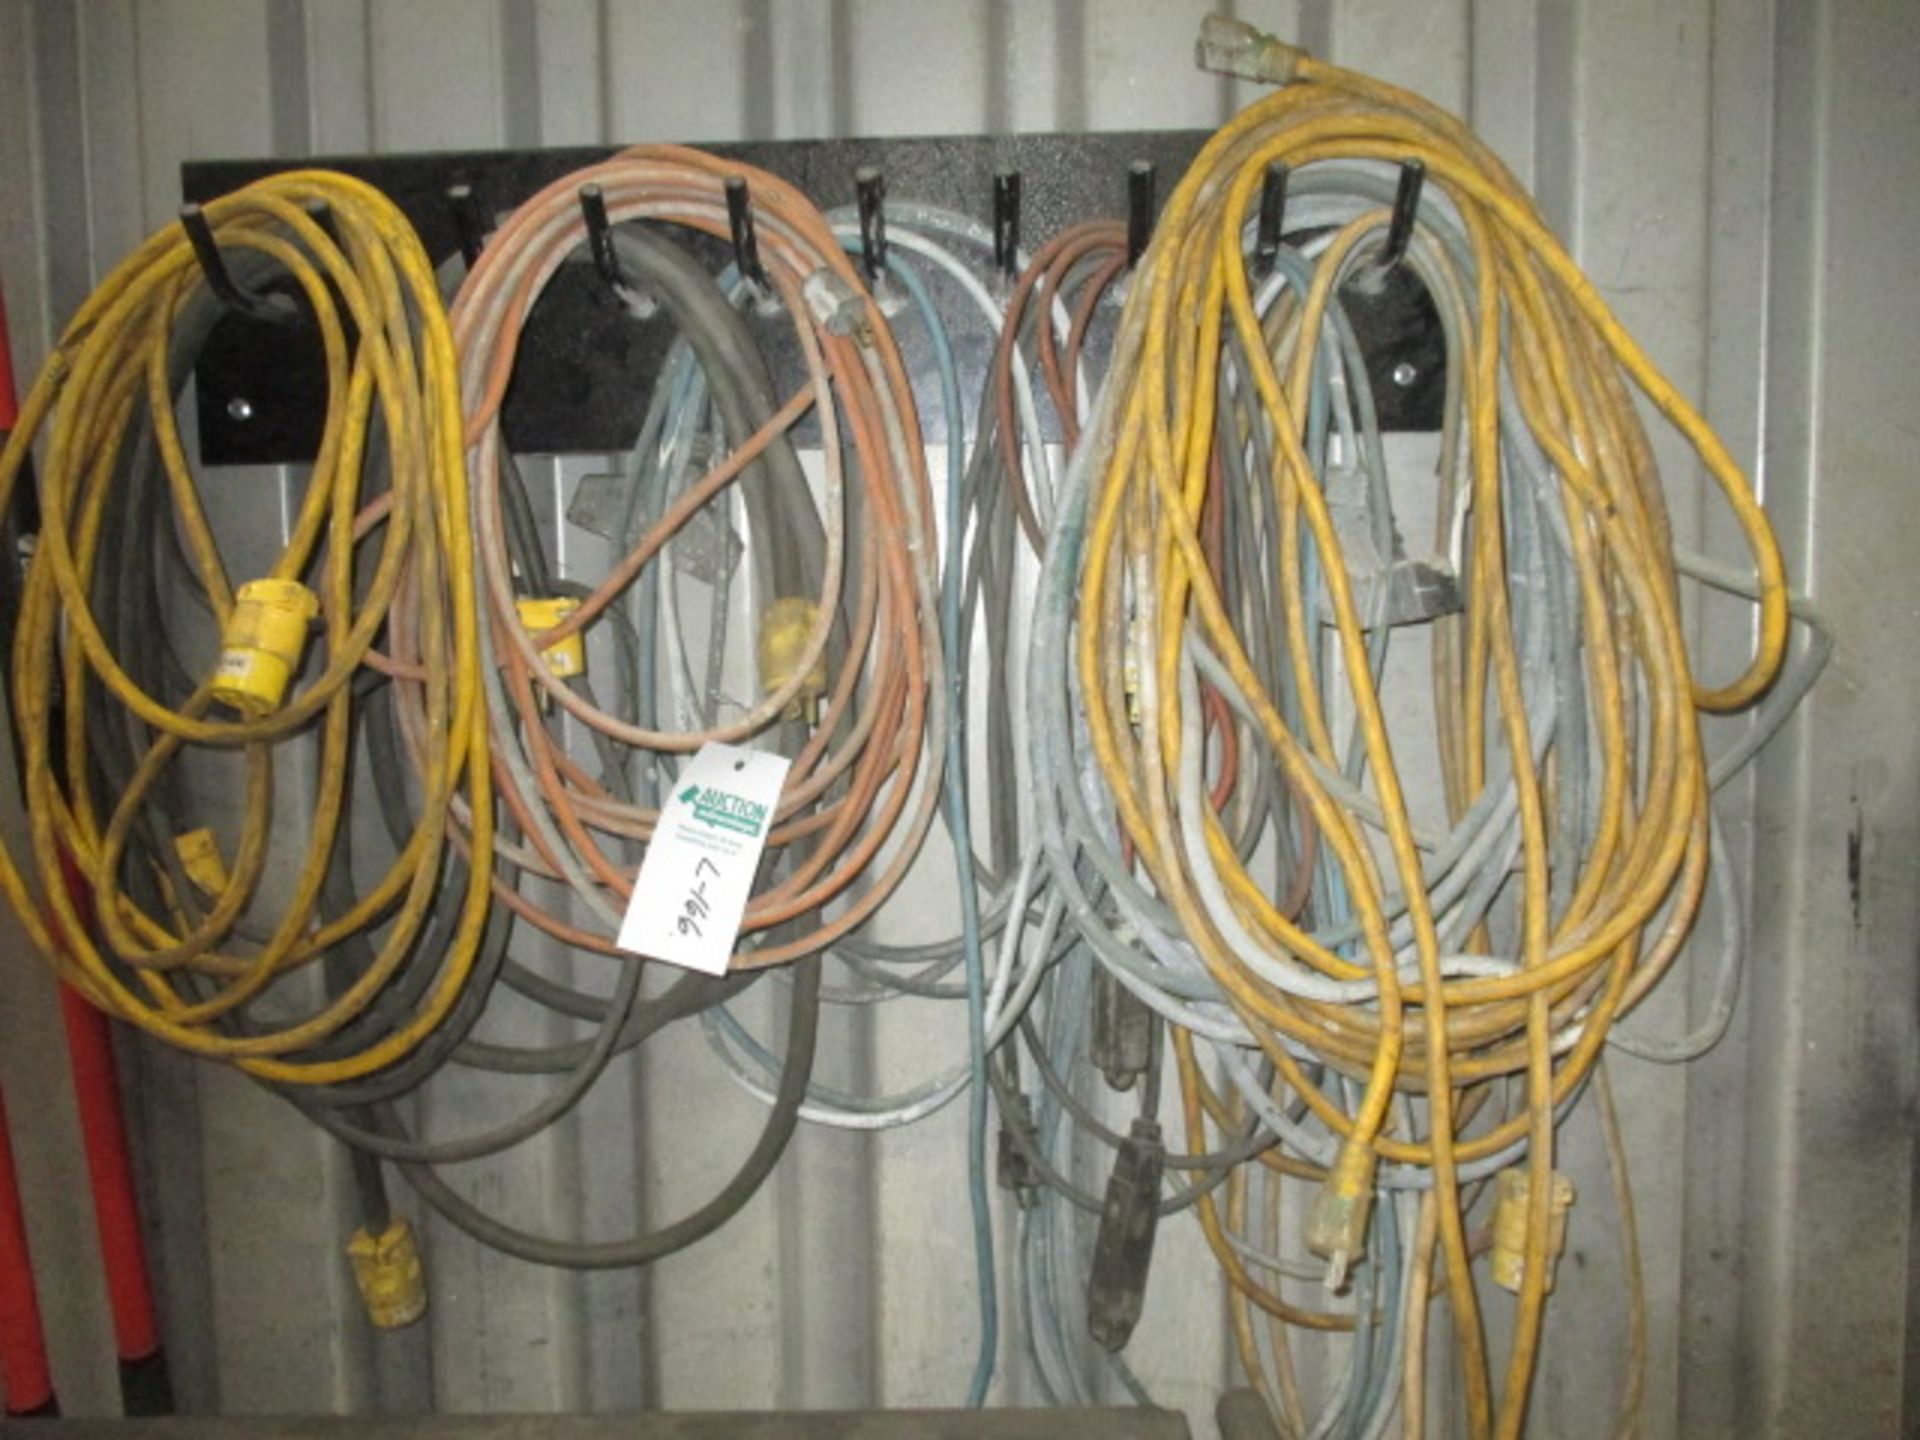 Wall Lot of Ext Cords, Approx 12 and 2 Brooms